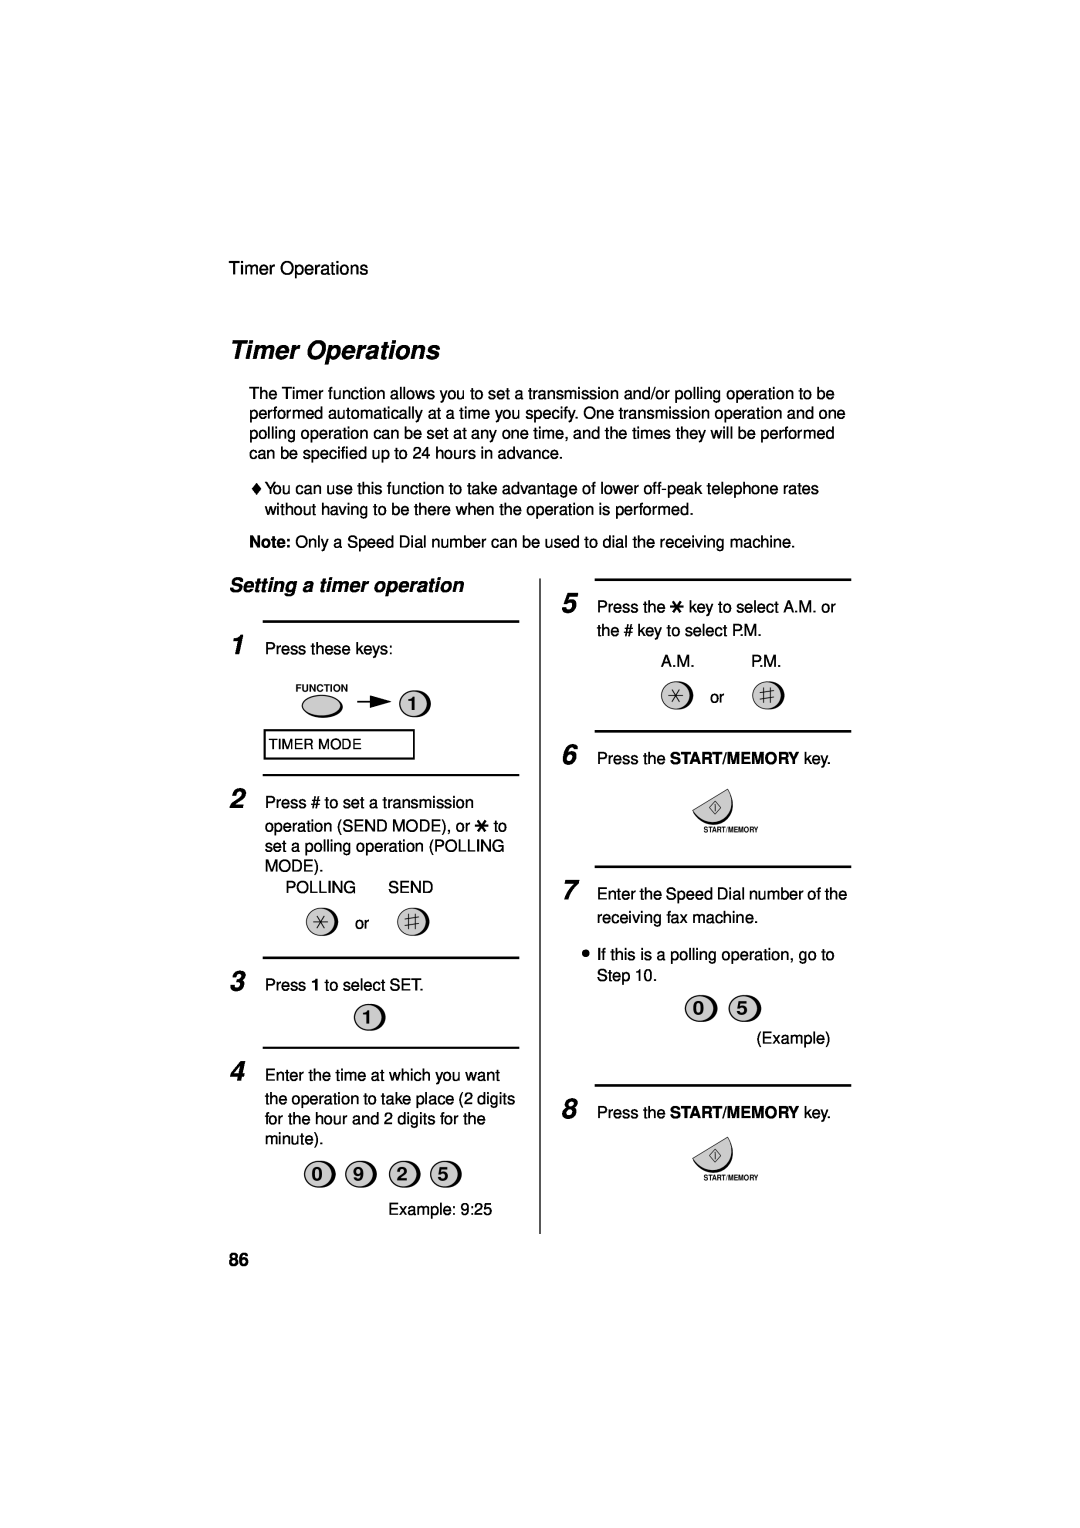 Sharp UX-340LM manual Timer Operations, Setting a timer operation, 0 9 2 